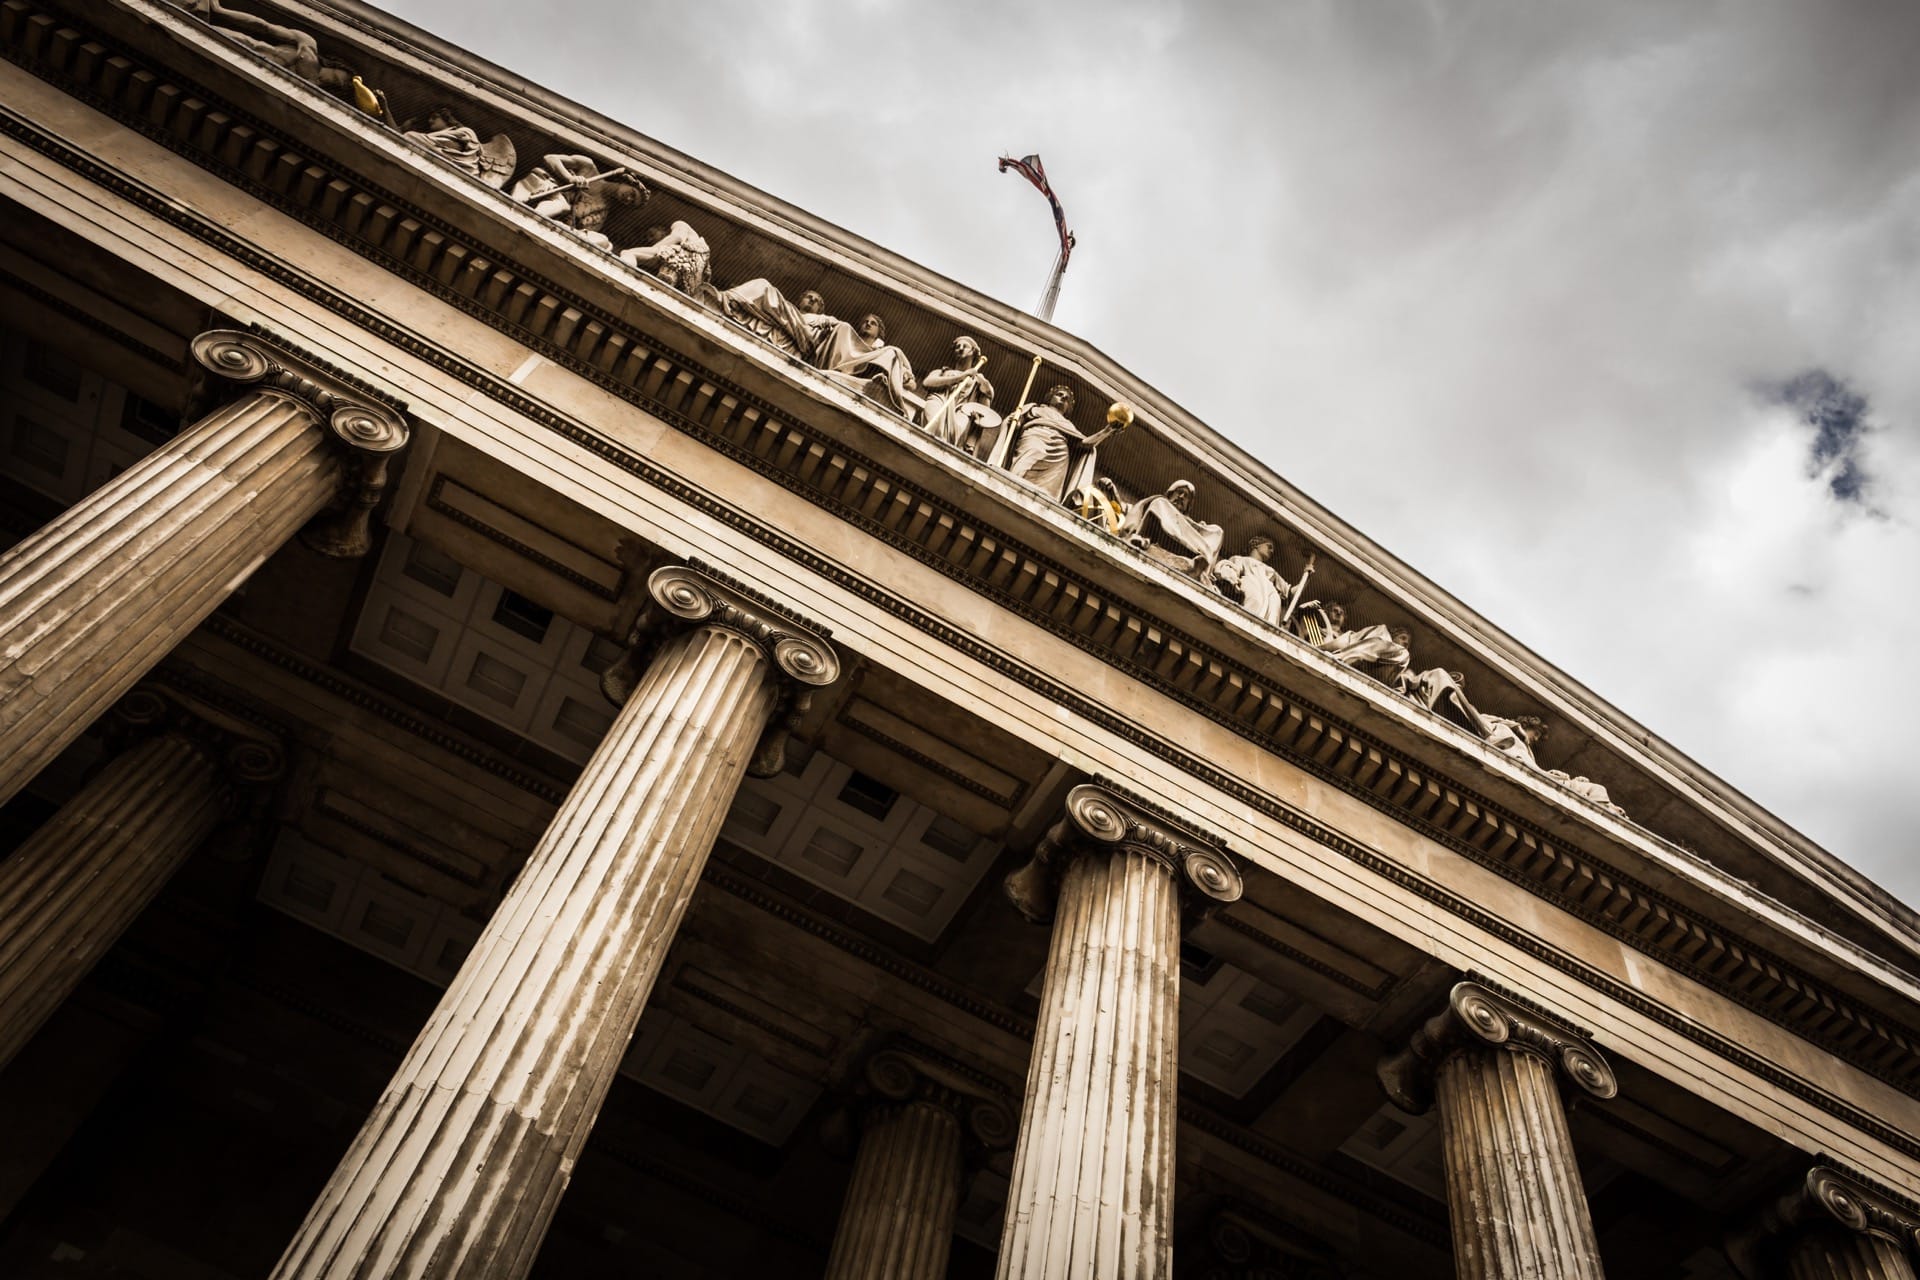 Unfair trade practices:  French Supreme Court gives precisions as to the burden and standard of proof of “submission or attempt to submit” to a significant unbalance